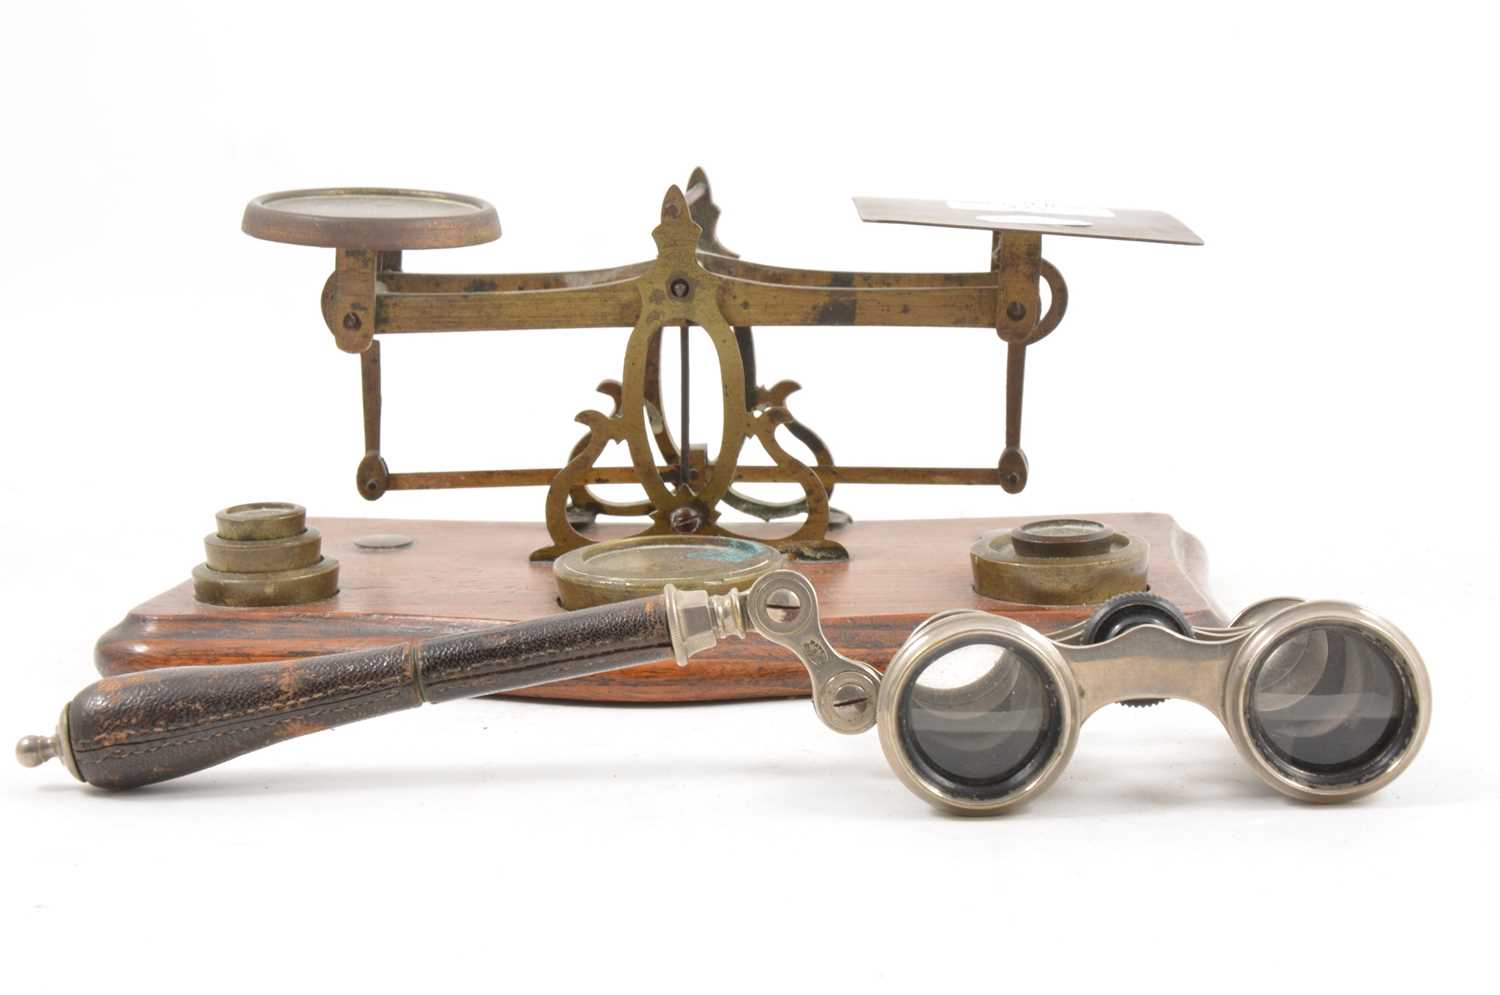 Lot 115 - Postal scales and opera glasses